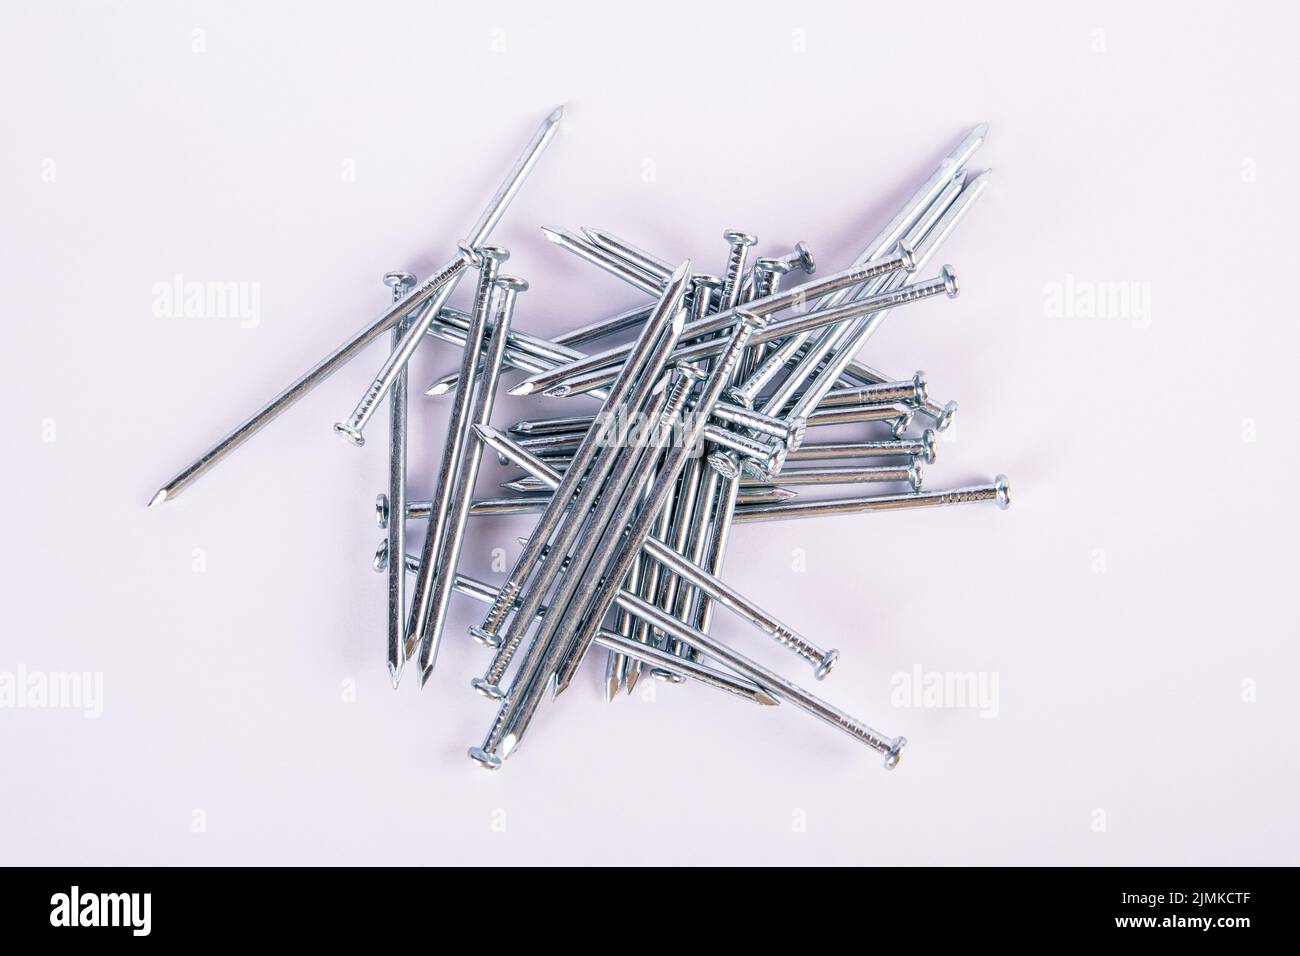 Construction nails in a pile on a white background. Stock Photo